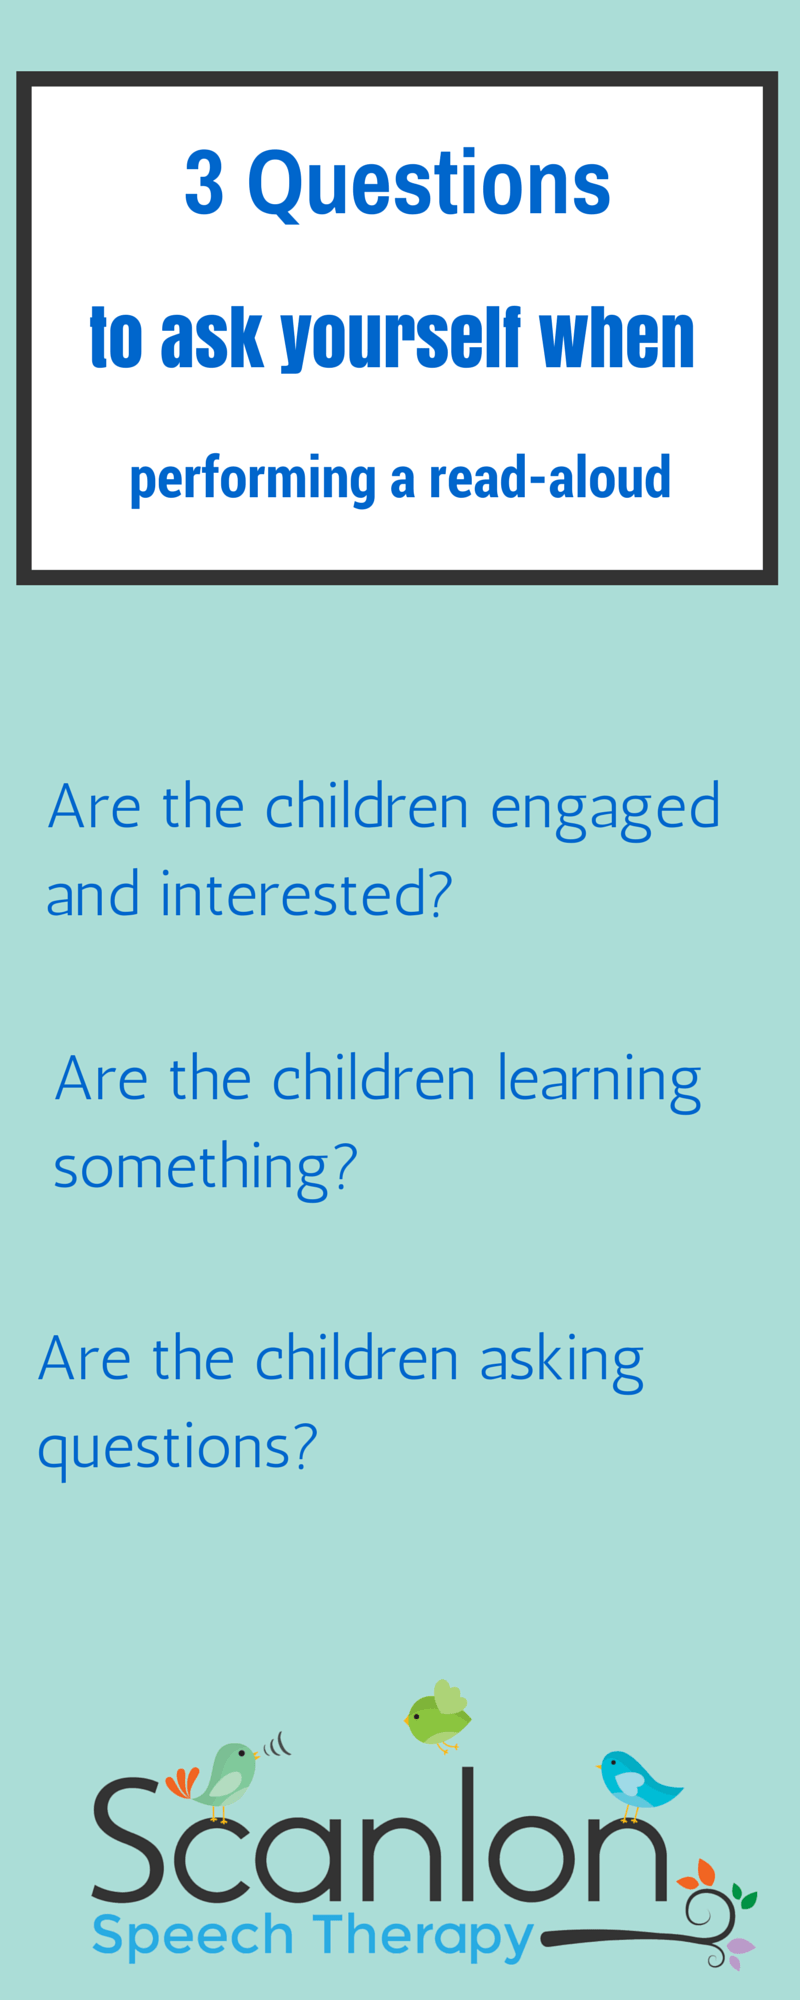 Revised 3 questions to ask when performing a read-aloud